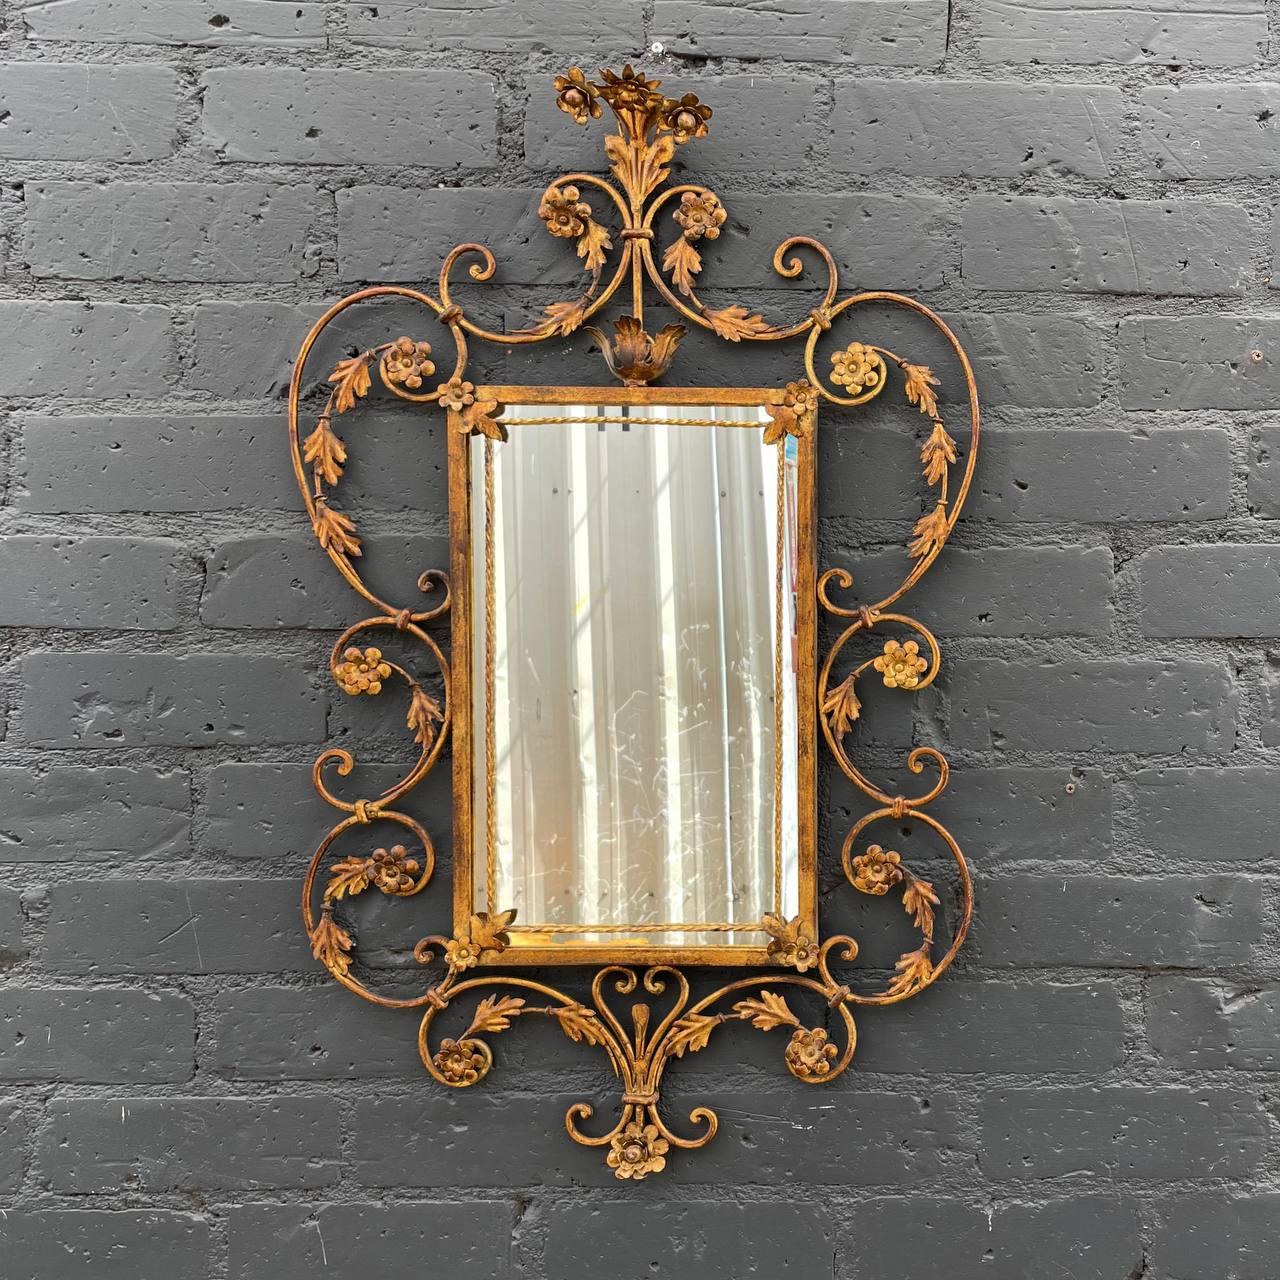 Antique Italian Gilt-Iron Rococo Style Mirror

Country: Italy
Materials: Gilt Iron, Original Mirror
Condition: Original Condition
Style: Italian Antique
Year: 1940s

$1,100

Dimensions 
39”H x 24”W x 5”D.